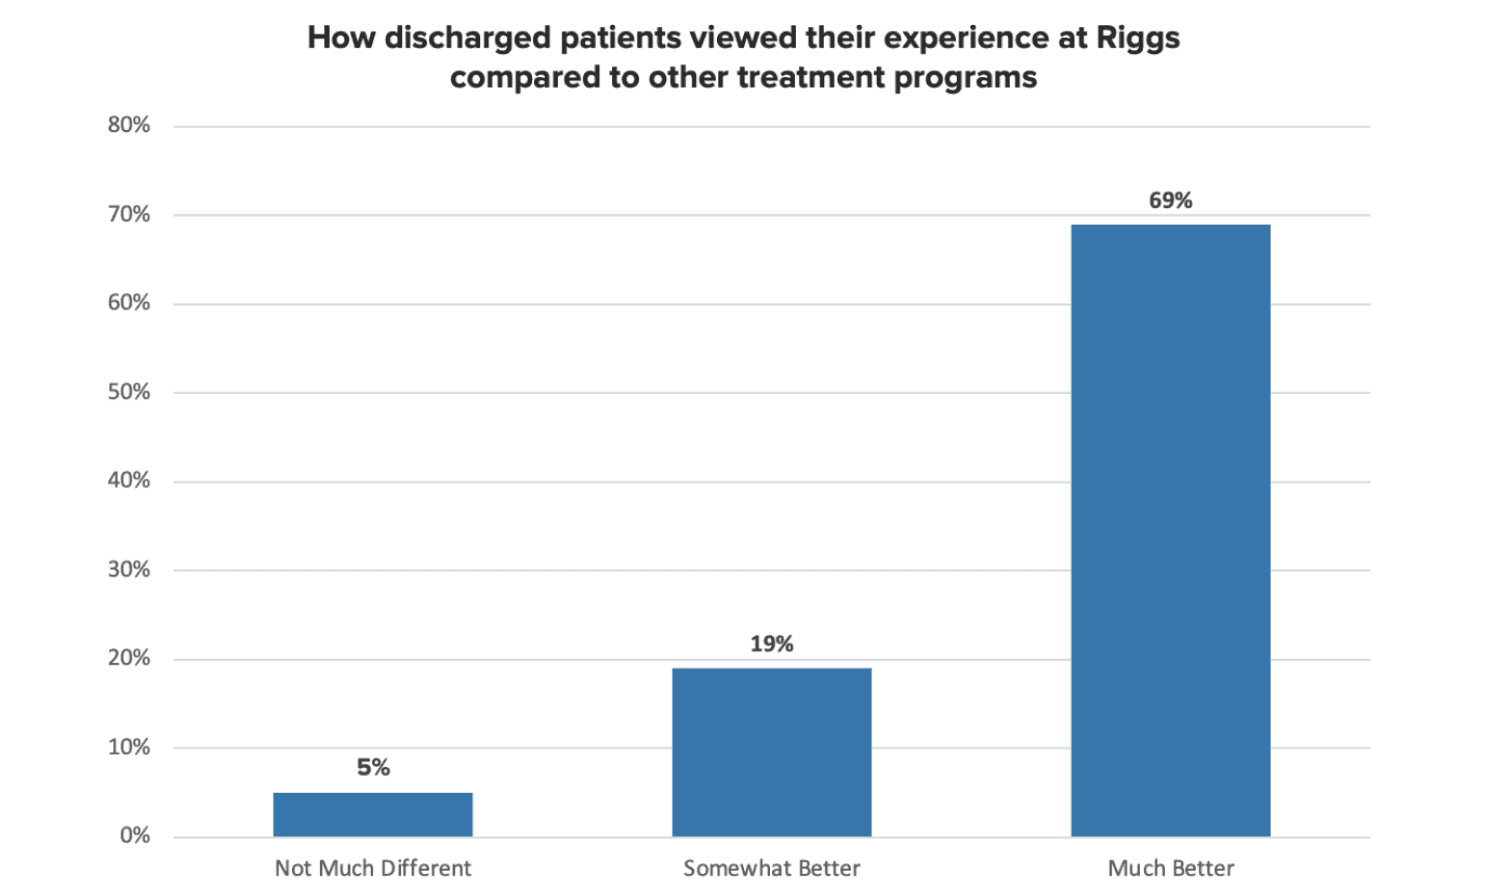 Bar chart showing how discharged patients rate their Austen Riggs experience compared to other treatment programs, with 69 percent feeling much better